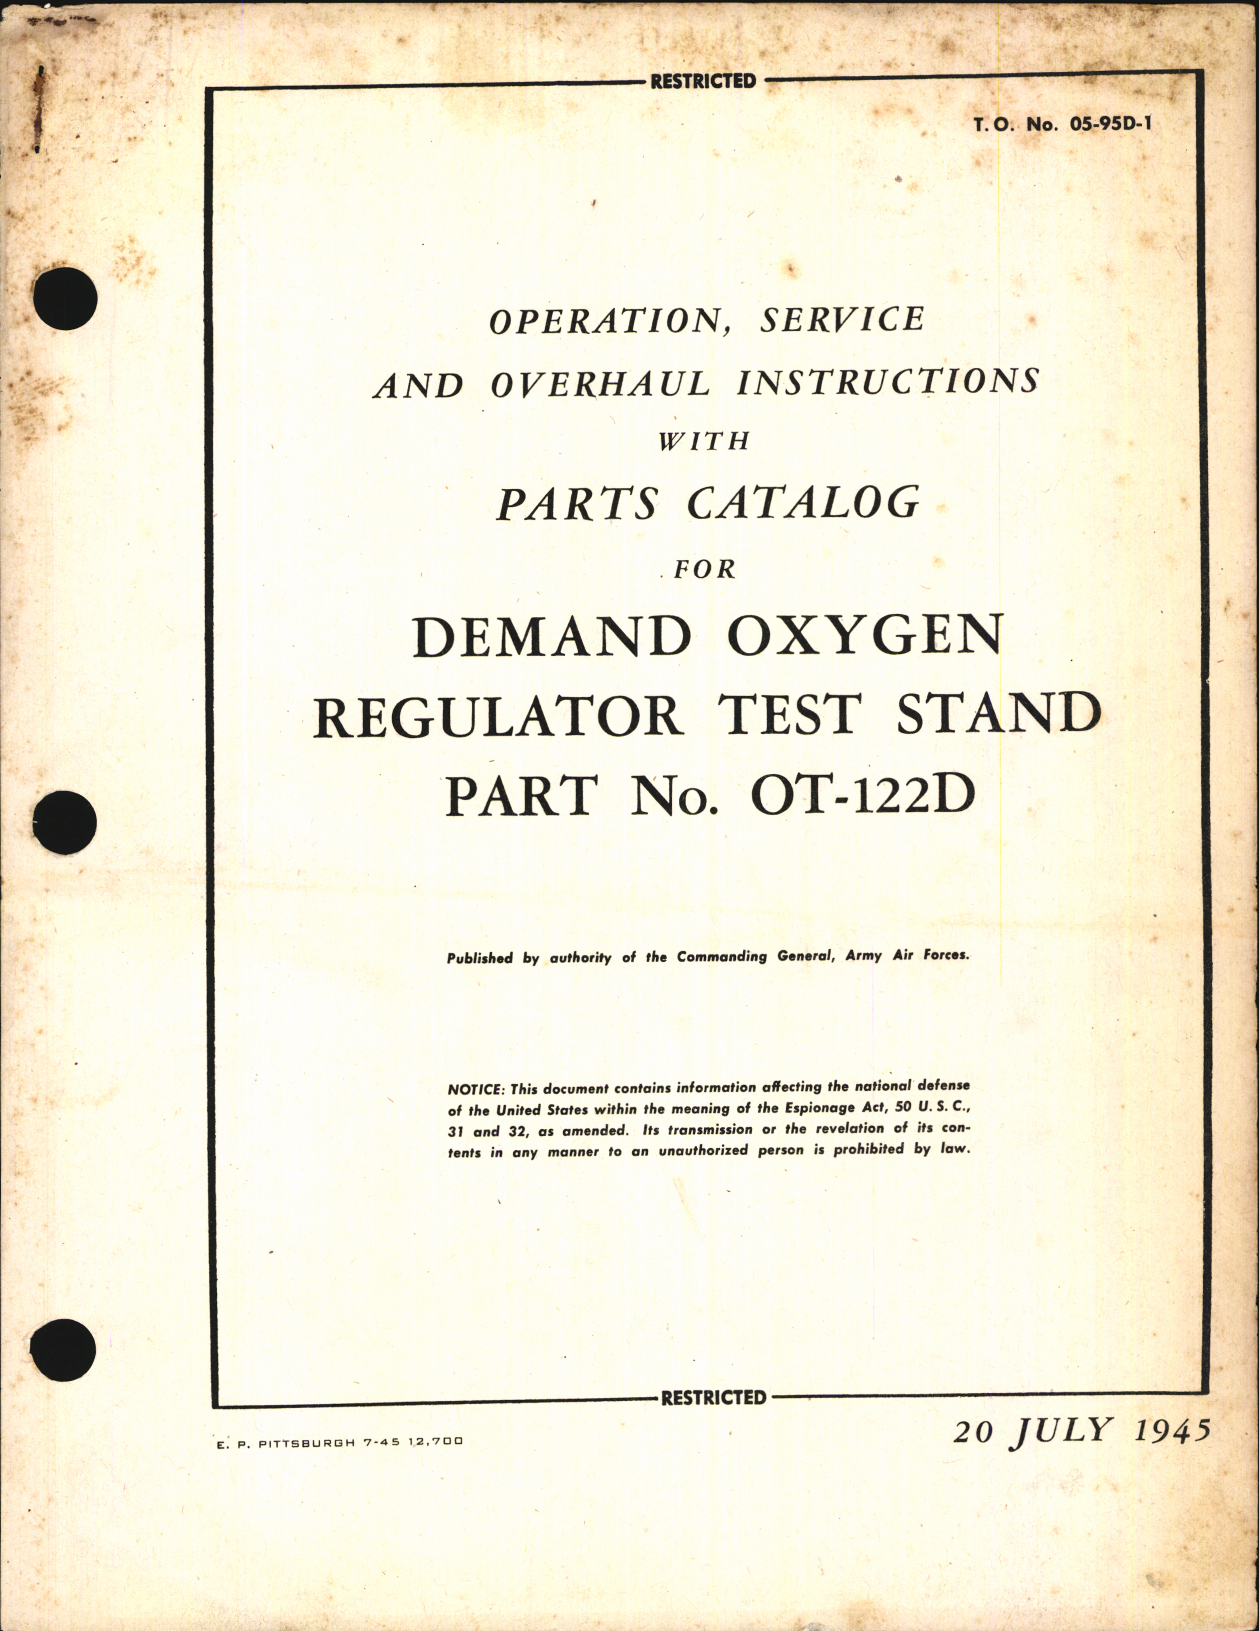 Sample page 1 from AirCorps Library document: Operation, Service and Overhaul Instructions with Parts Catalog for Demand Oxygen Regulator Test Stand Part No. OT-122D